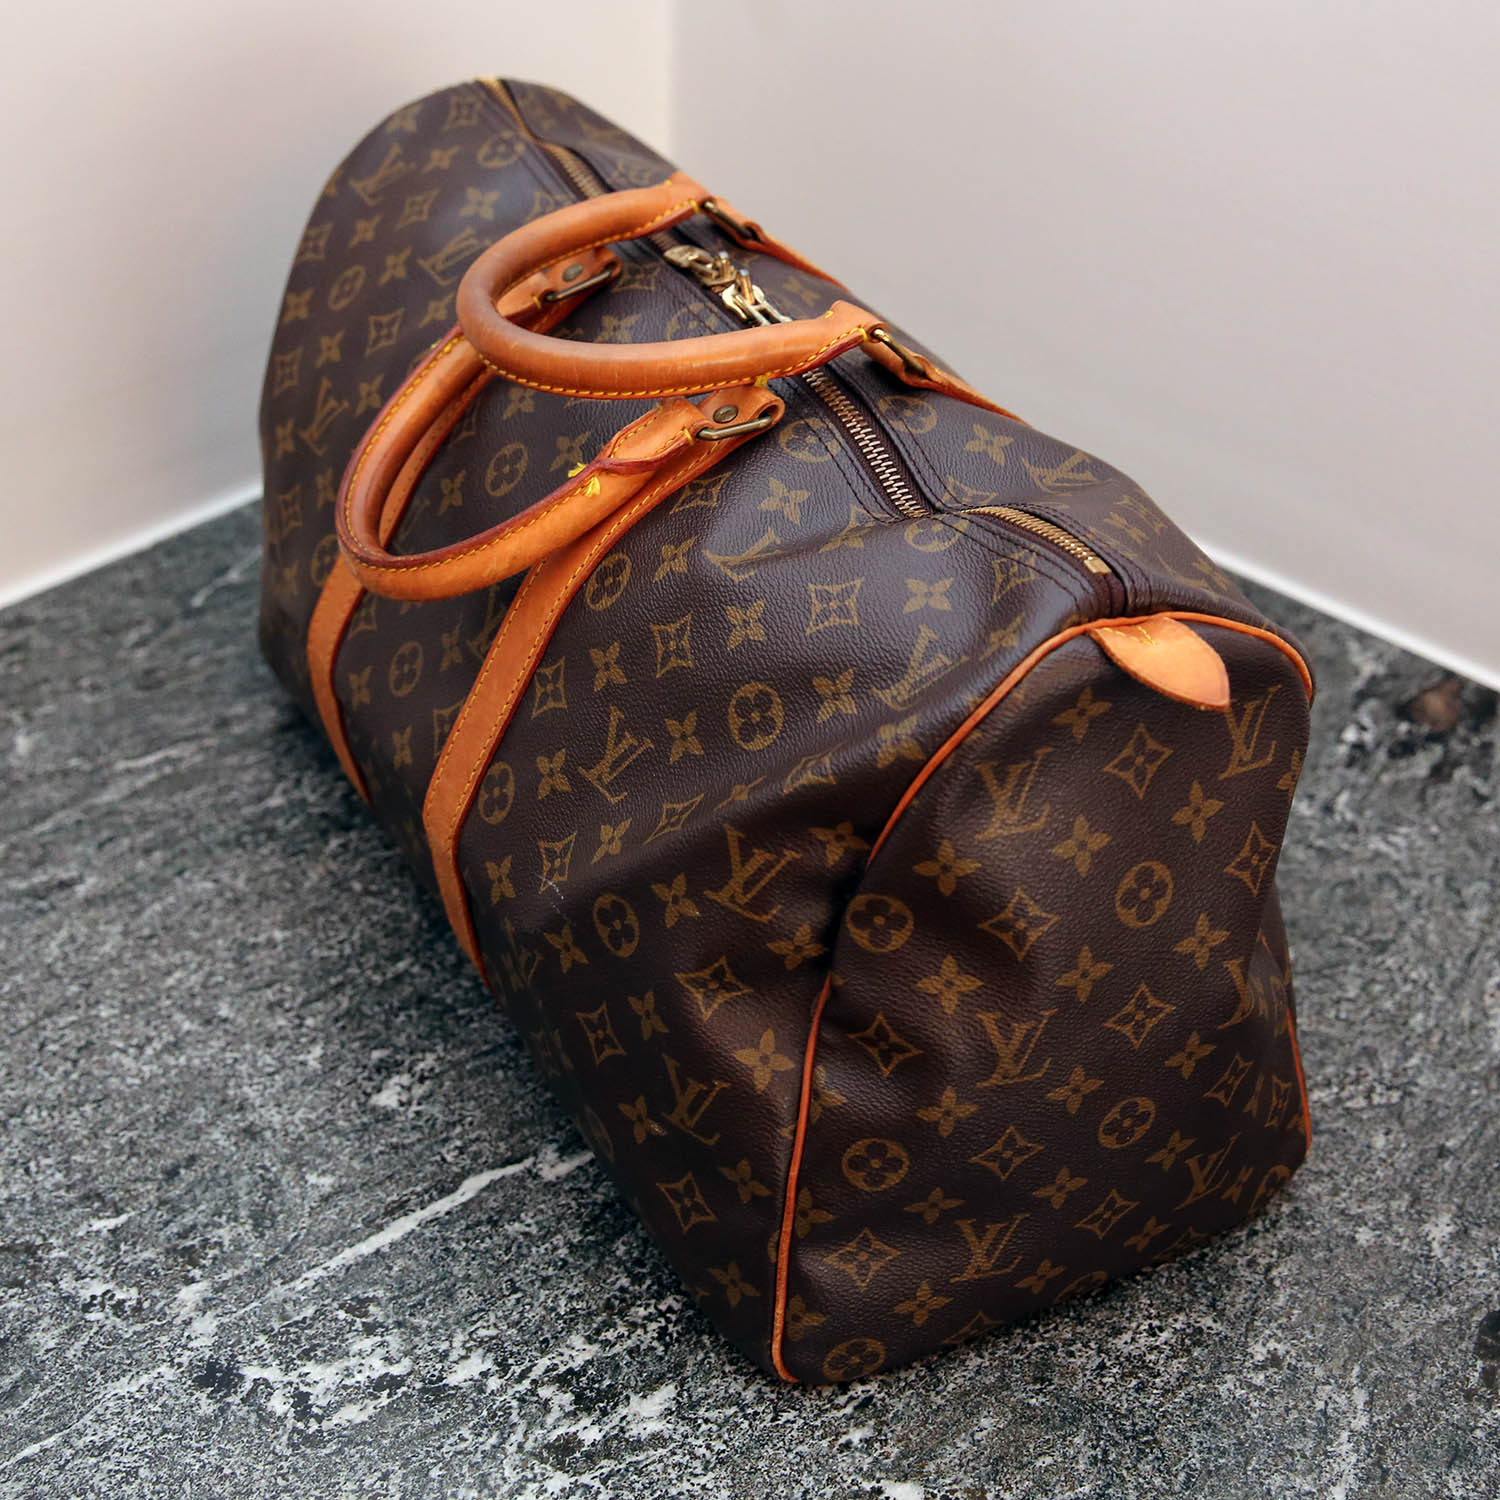 Louis Vuitton Keepall 45 - mediakits.theygsgroup.com - Pre-owned Louis Vuitton and other luxury brands